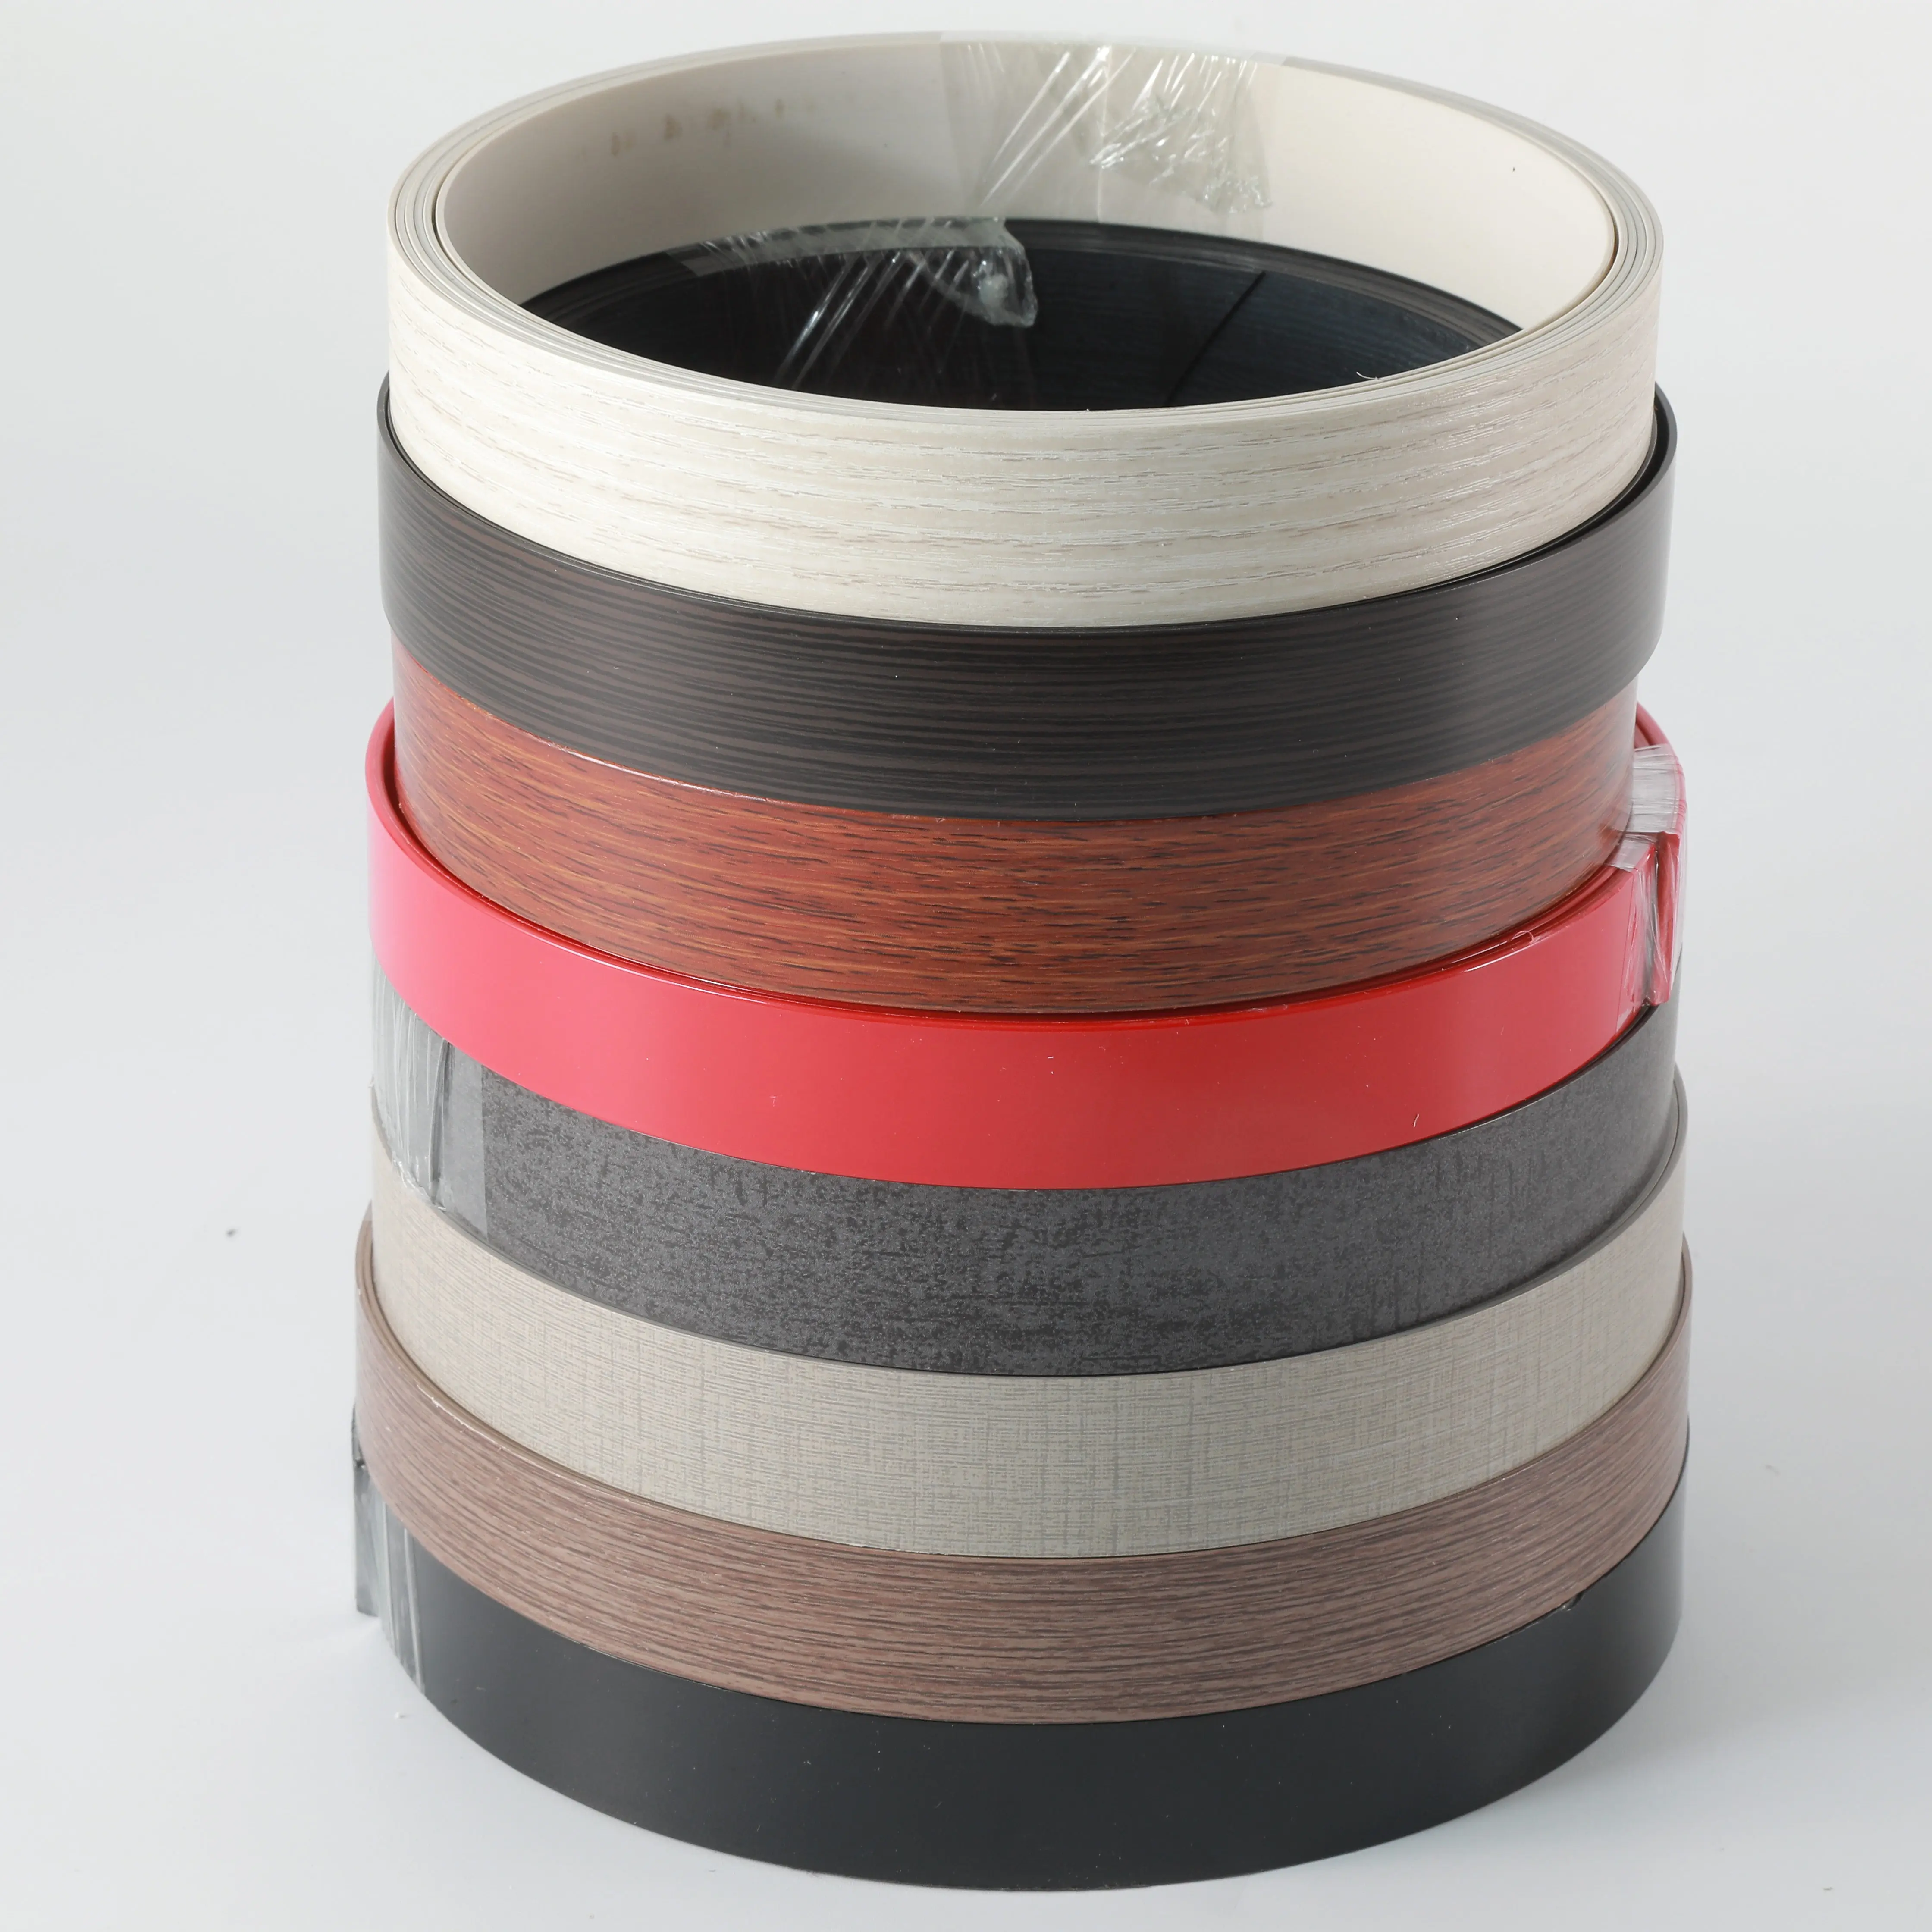 Accessories Factory Selling PVC Tapacanto Tapes High Quality ABS/PVC Edge Banding Tapes Furniture for Furniture